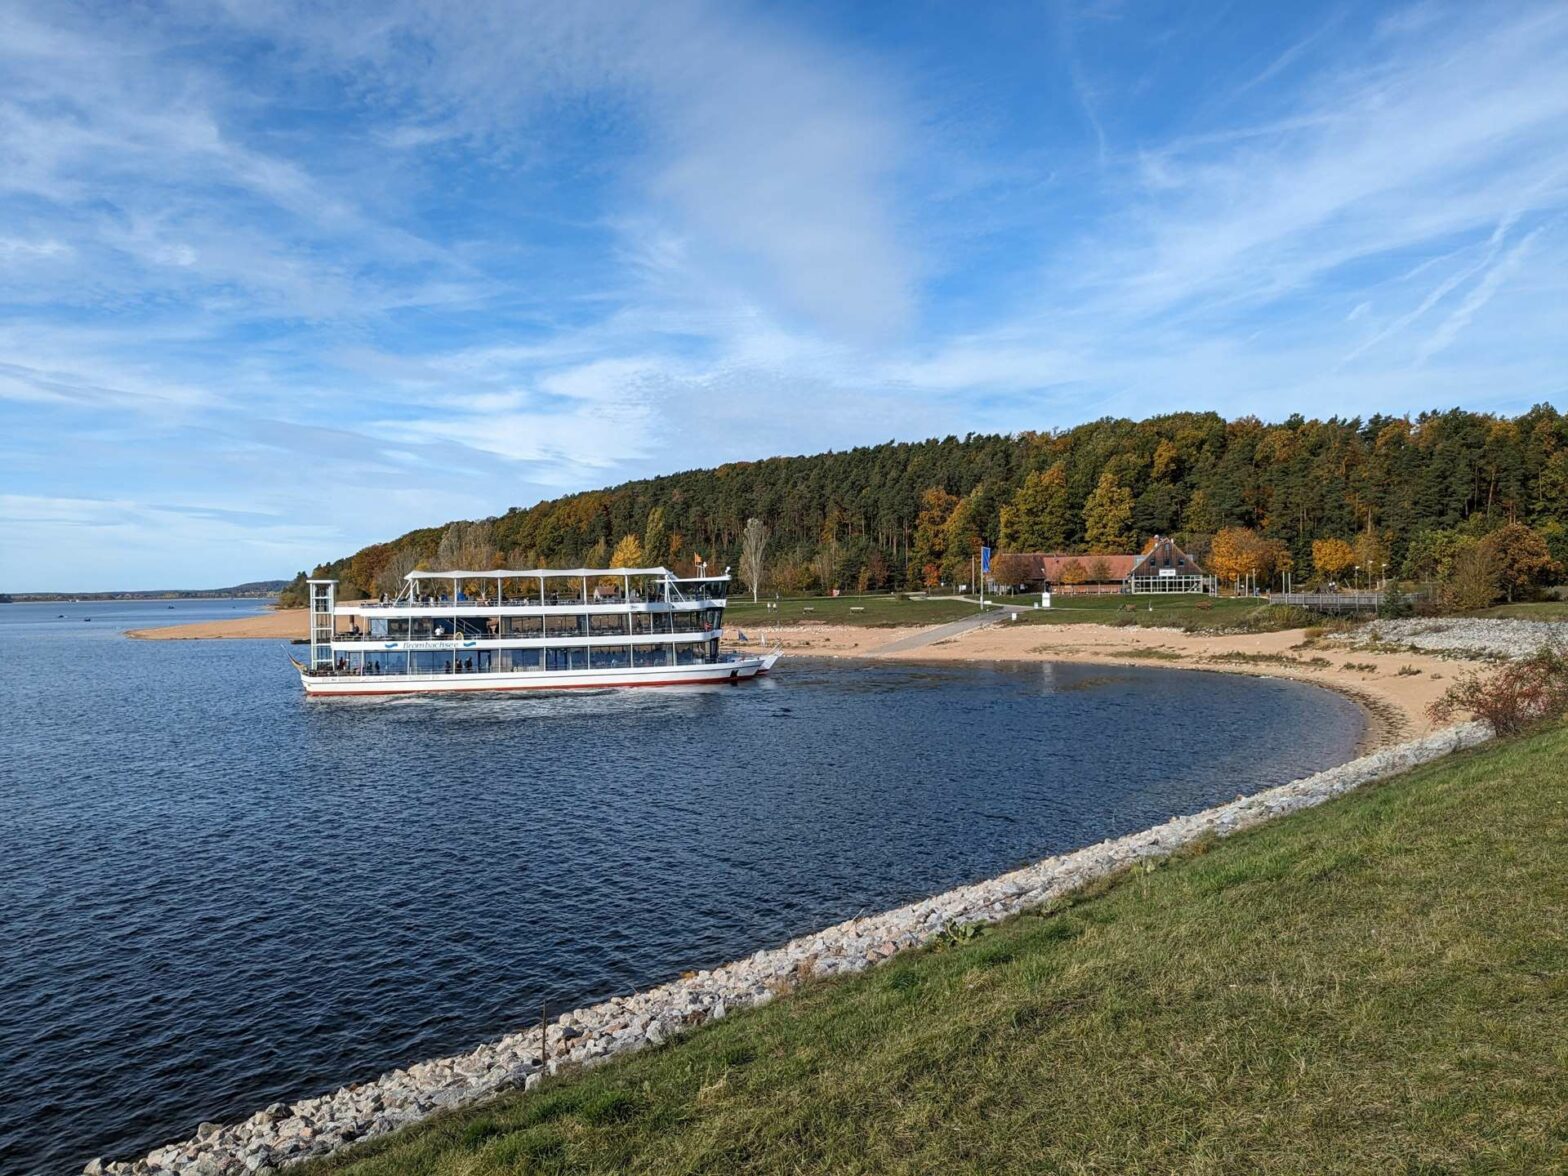 A ferry boat on Großer Brombachsee